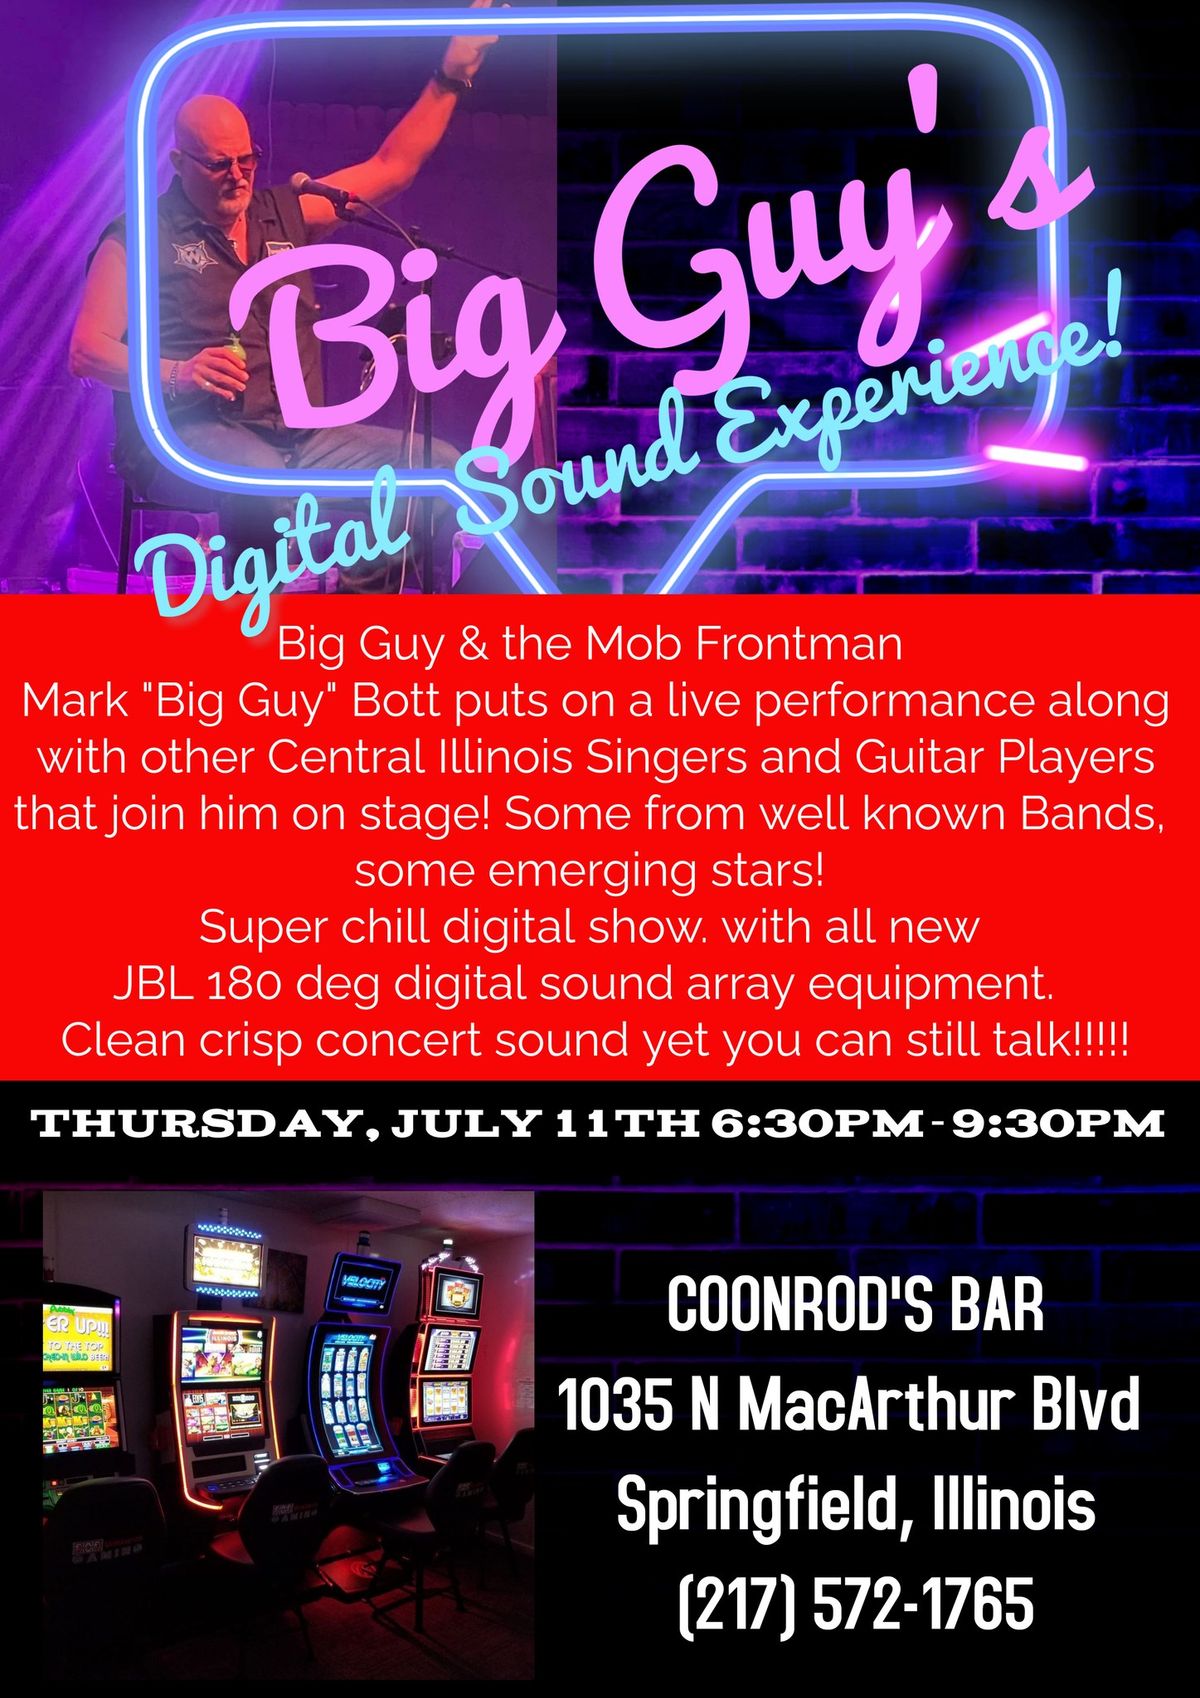 "Big Guys" Digital Sound Experience at Coonrods Bar in Springfield, IL